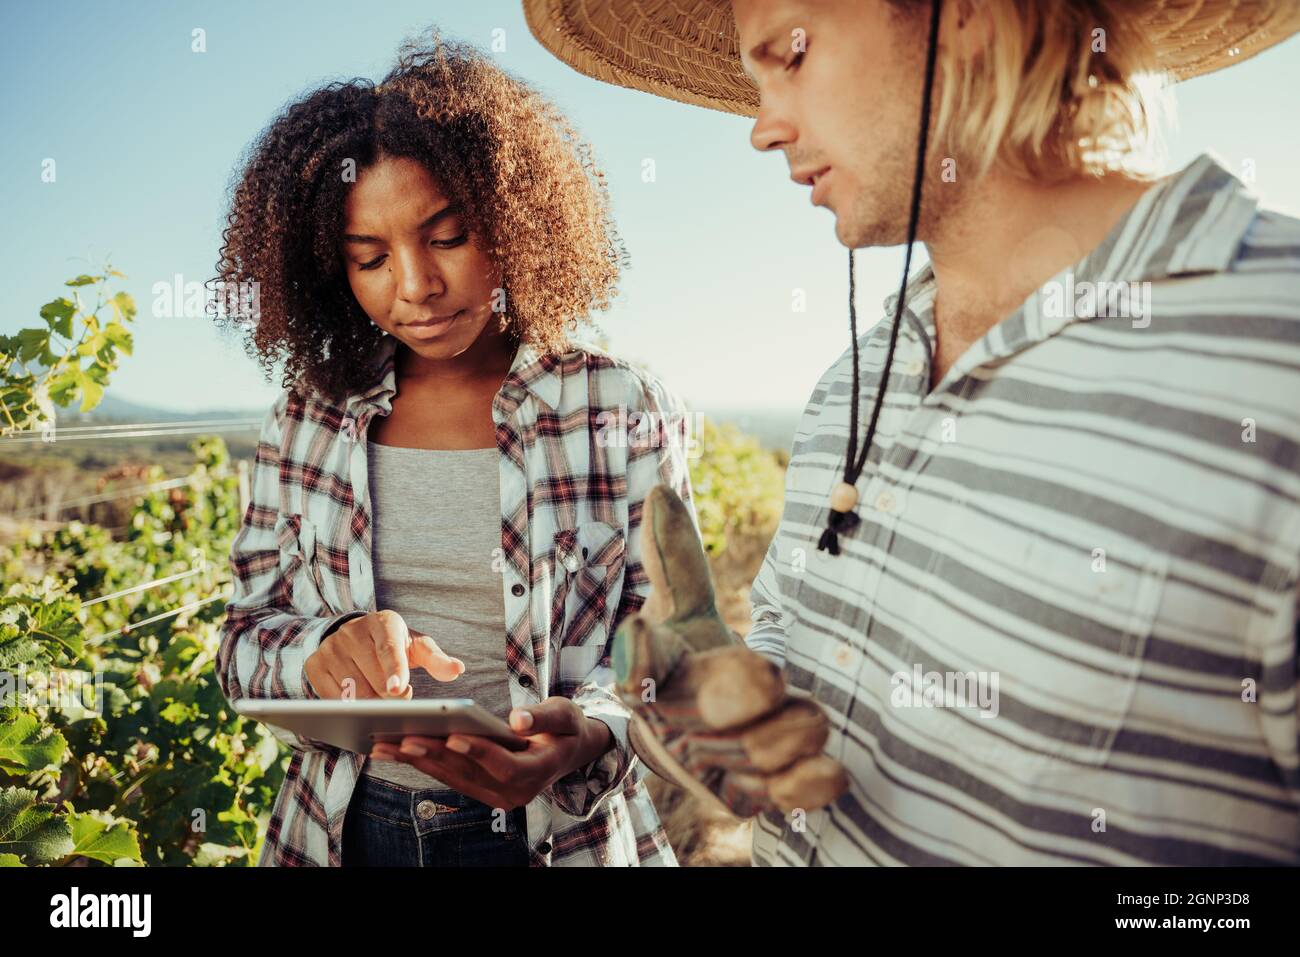 Male and female farmers working together in vineyards holding digital tablet researching for project Stock Photo